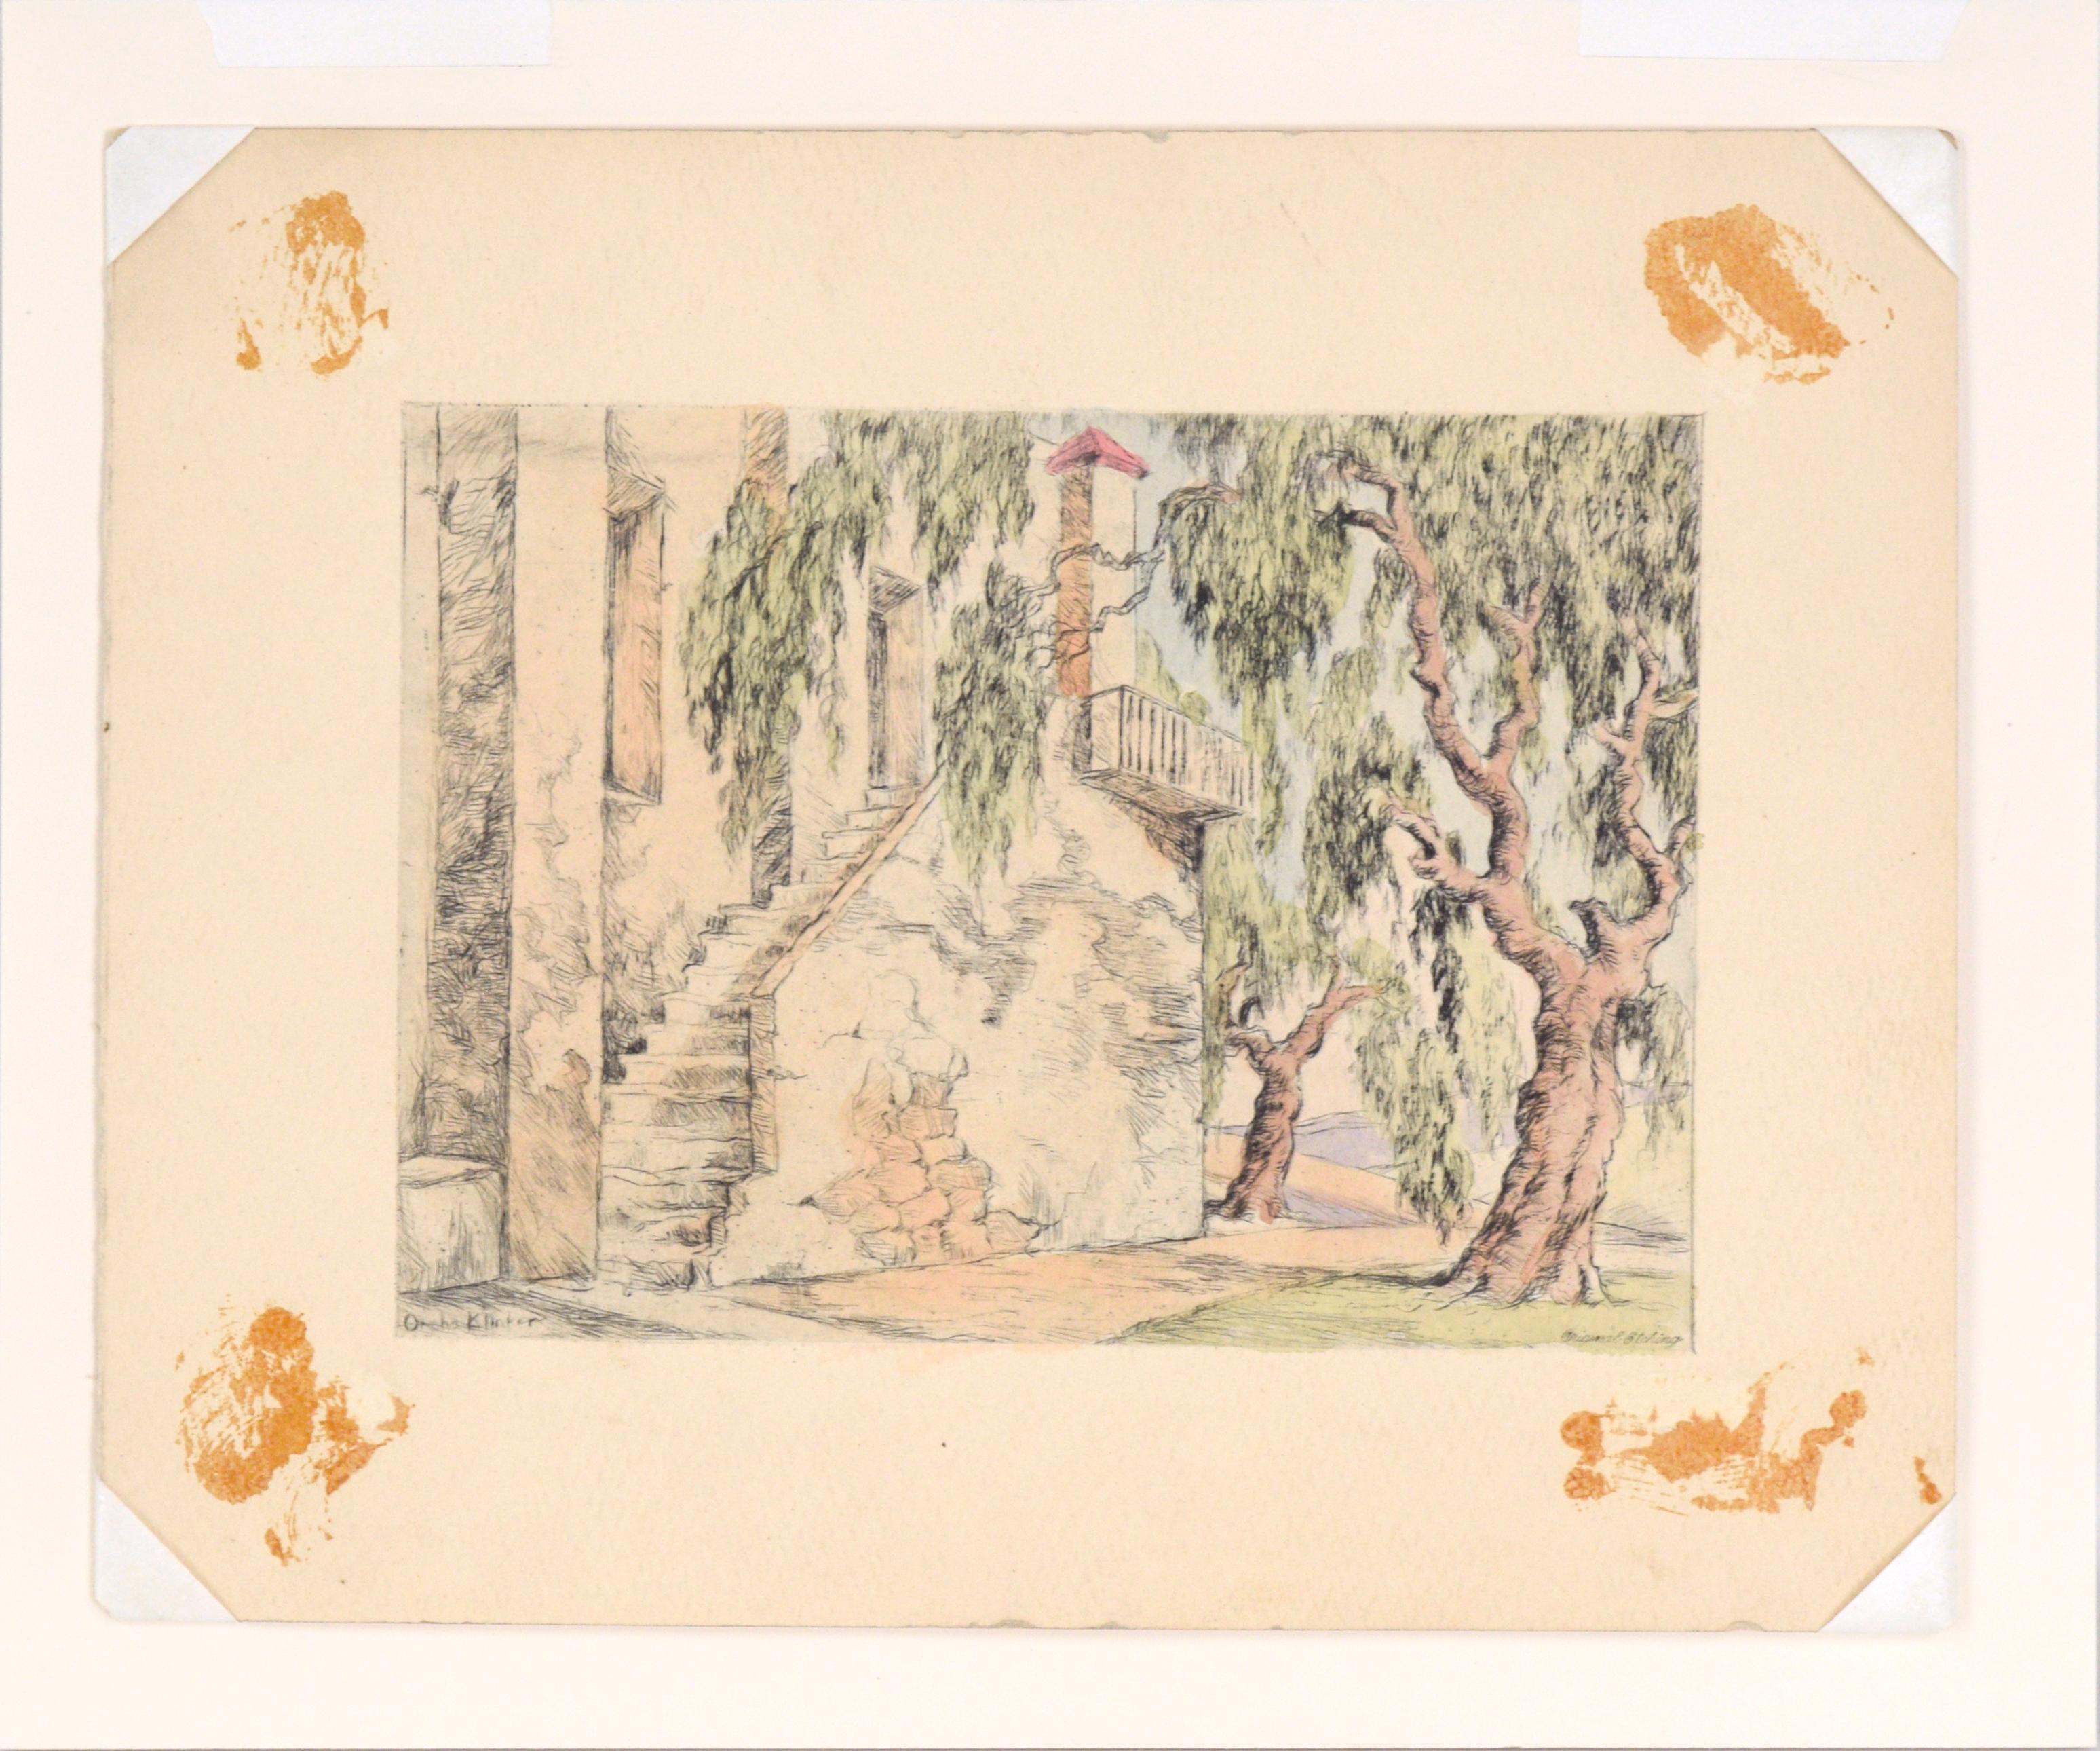 Corkscrew Willows with Stairs - Hand Colored Drypoint Etching California Adobe For Sale 4